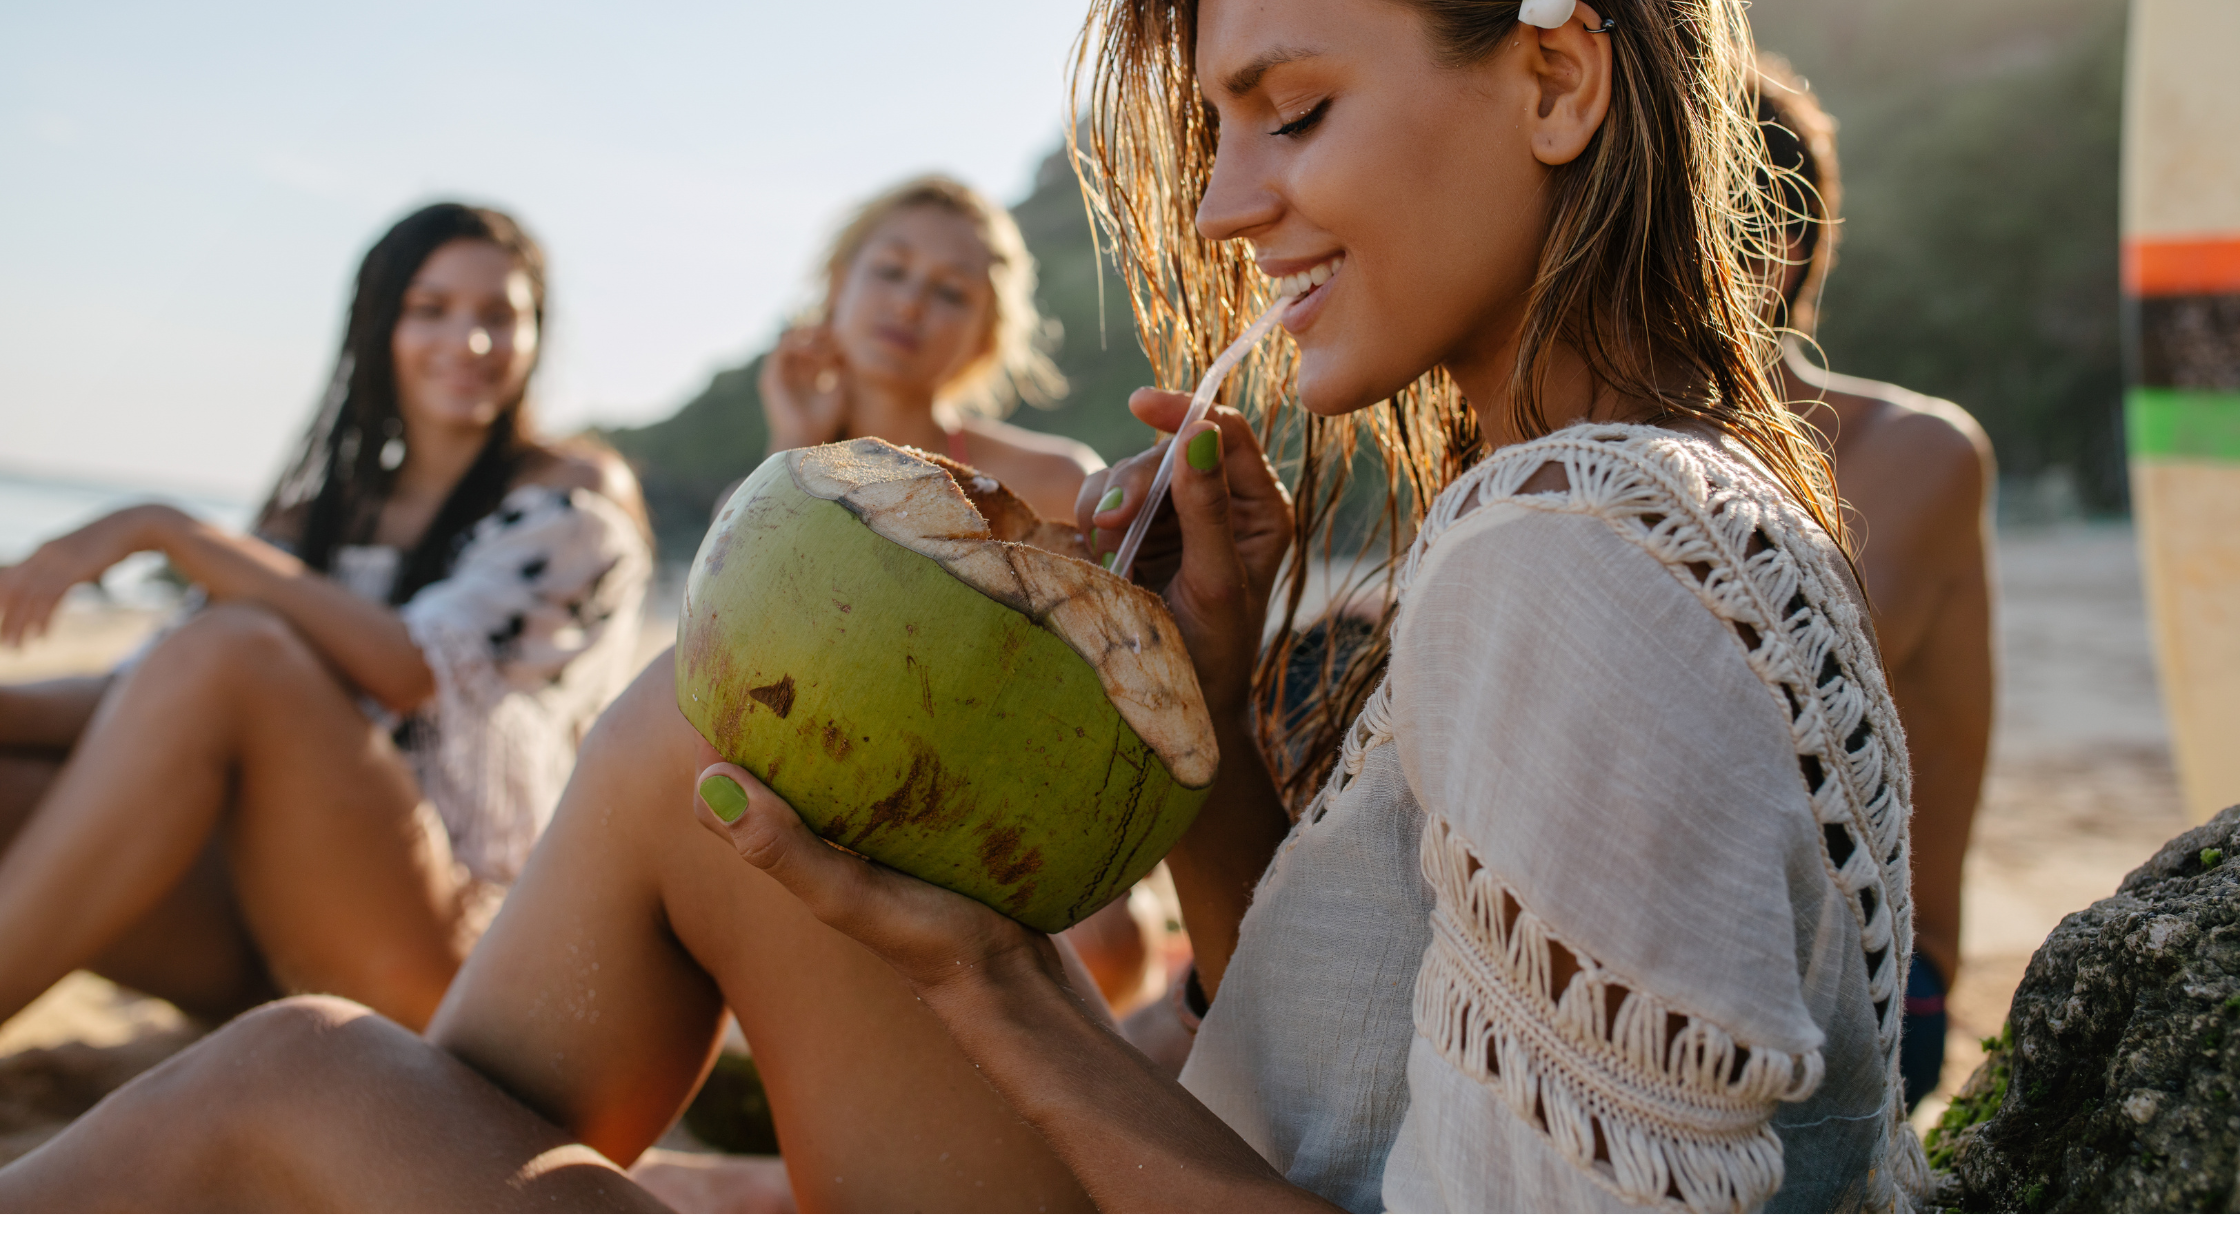 girl drinking coconut water from a green coconut